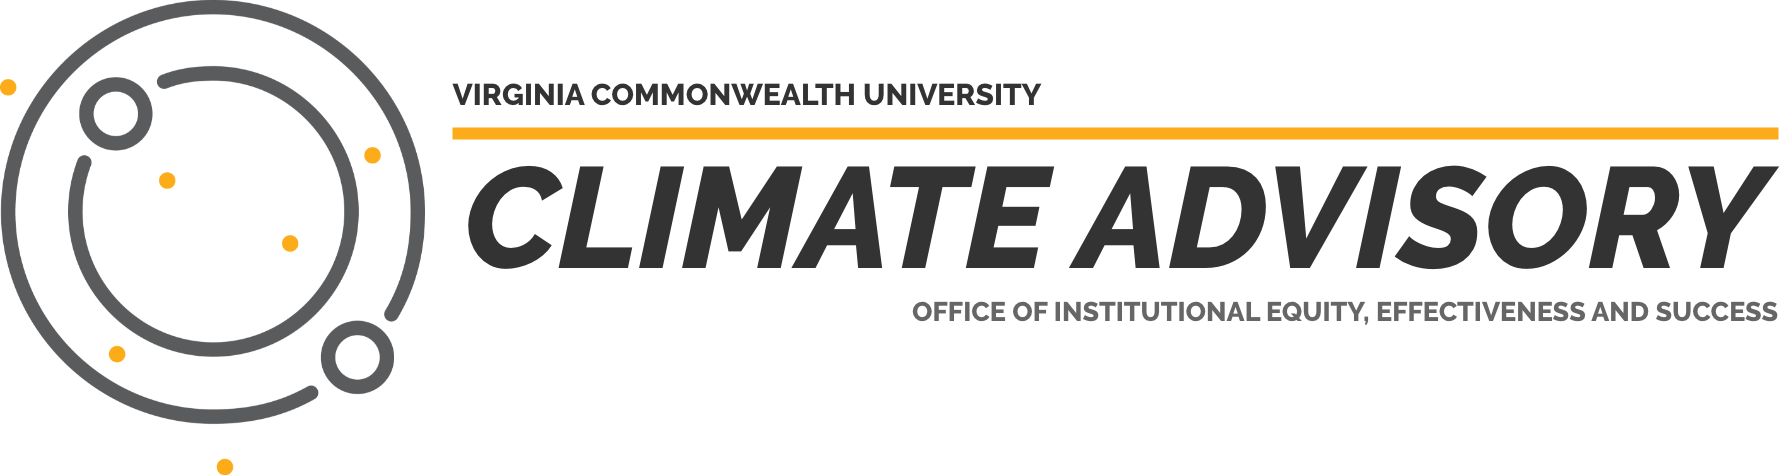 Climate advisory - Office of Institutional Equity, Effectiveness and Success